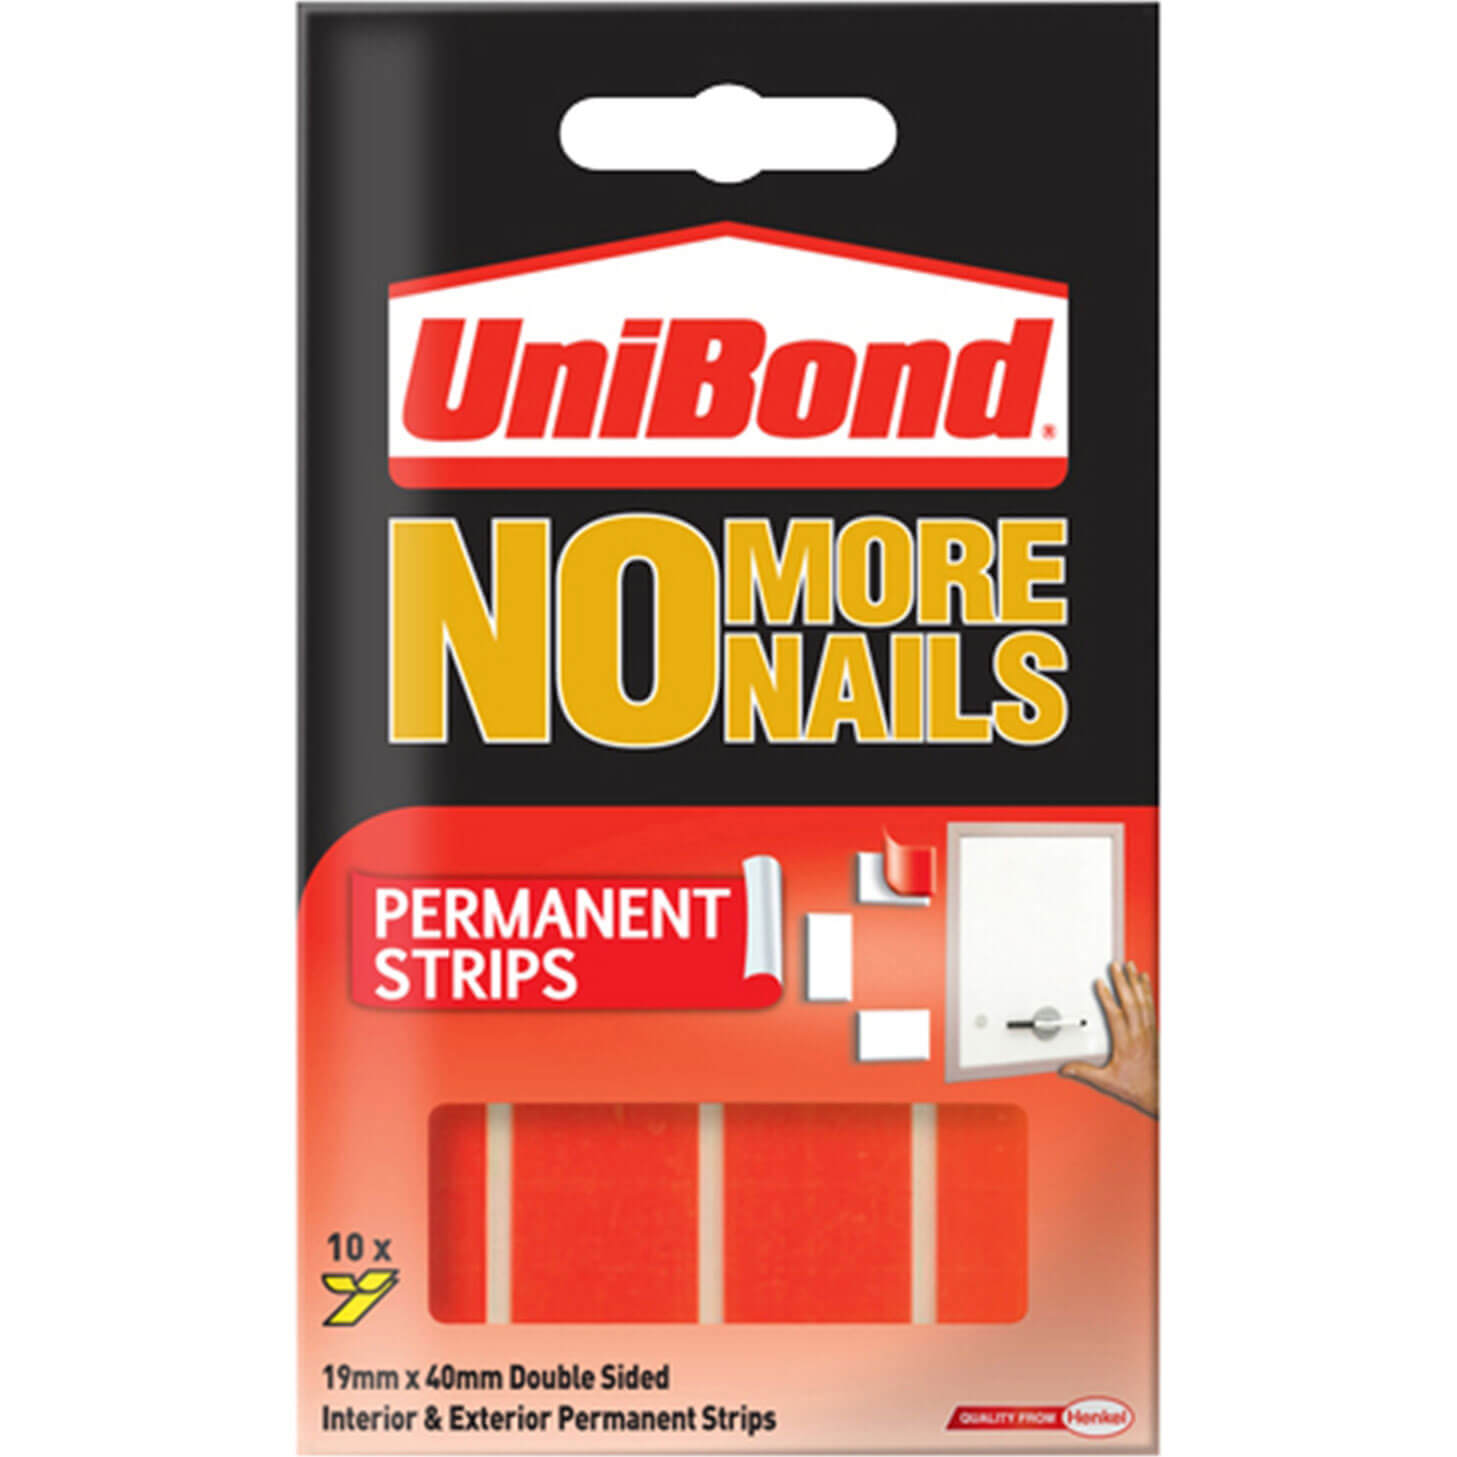 Unibond No More Nails Permanent Adhesive Strips Pack of 10